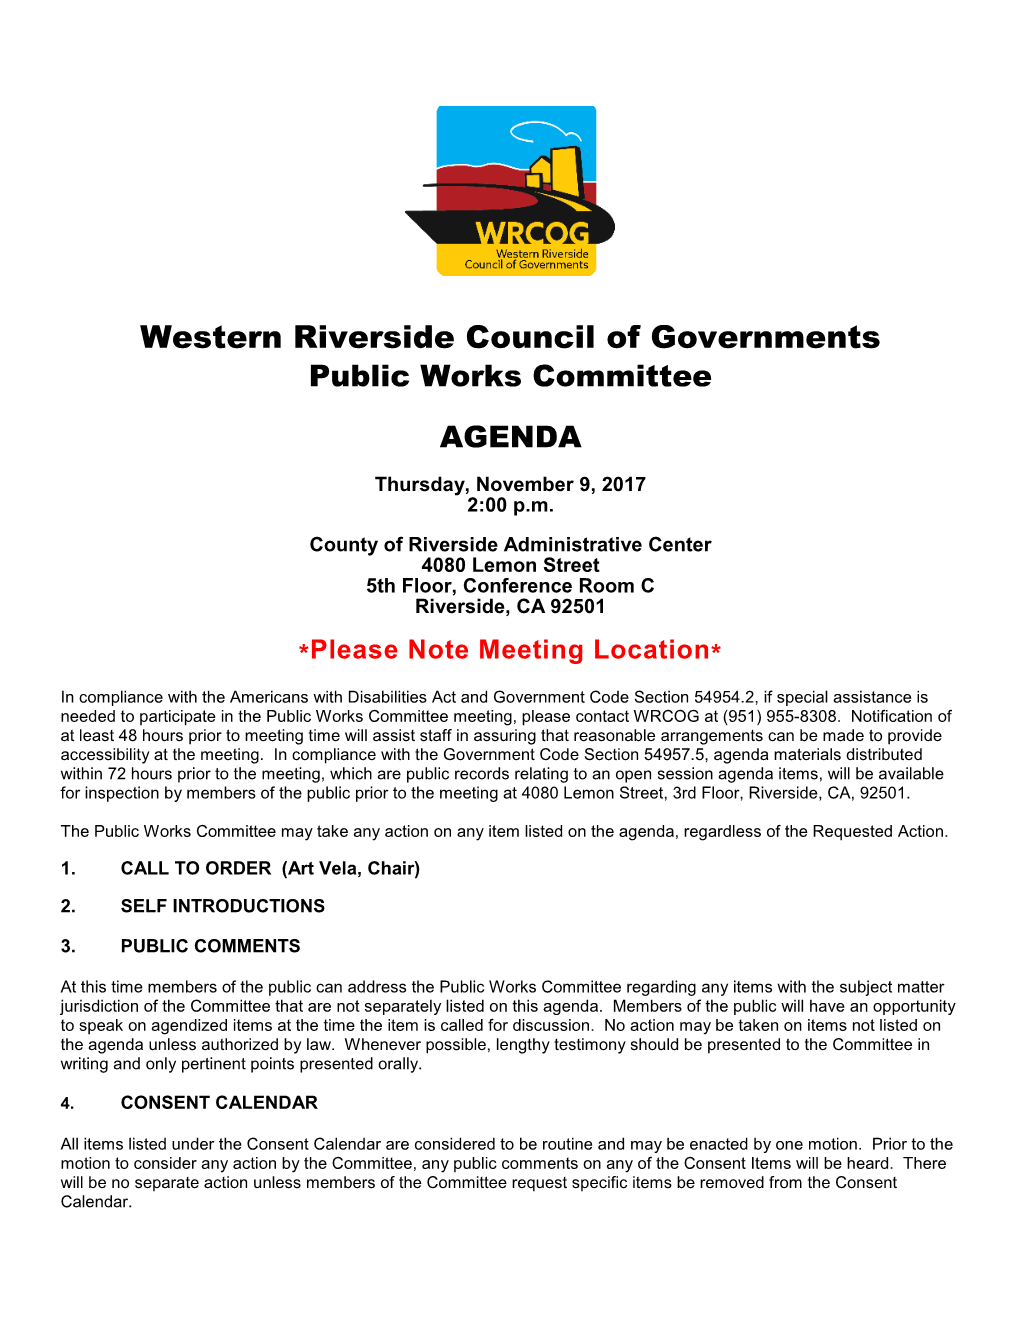 Western Riverside Council of Governments Public Works Committee